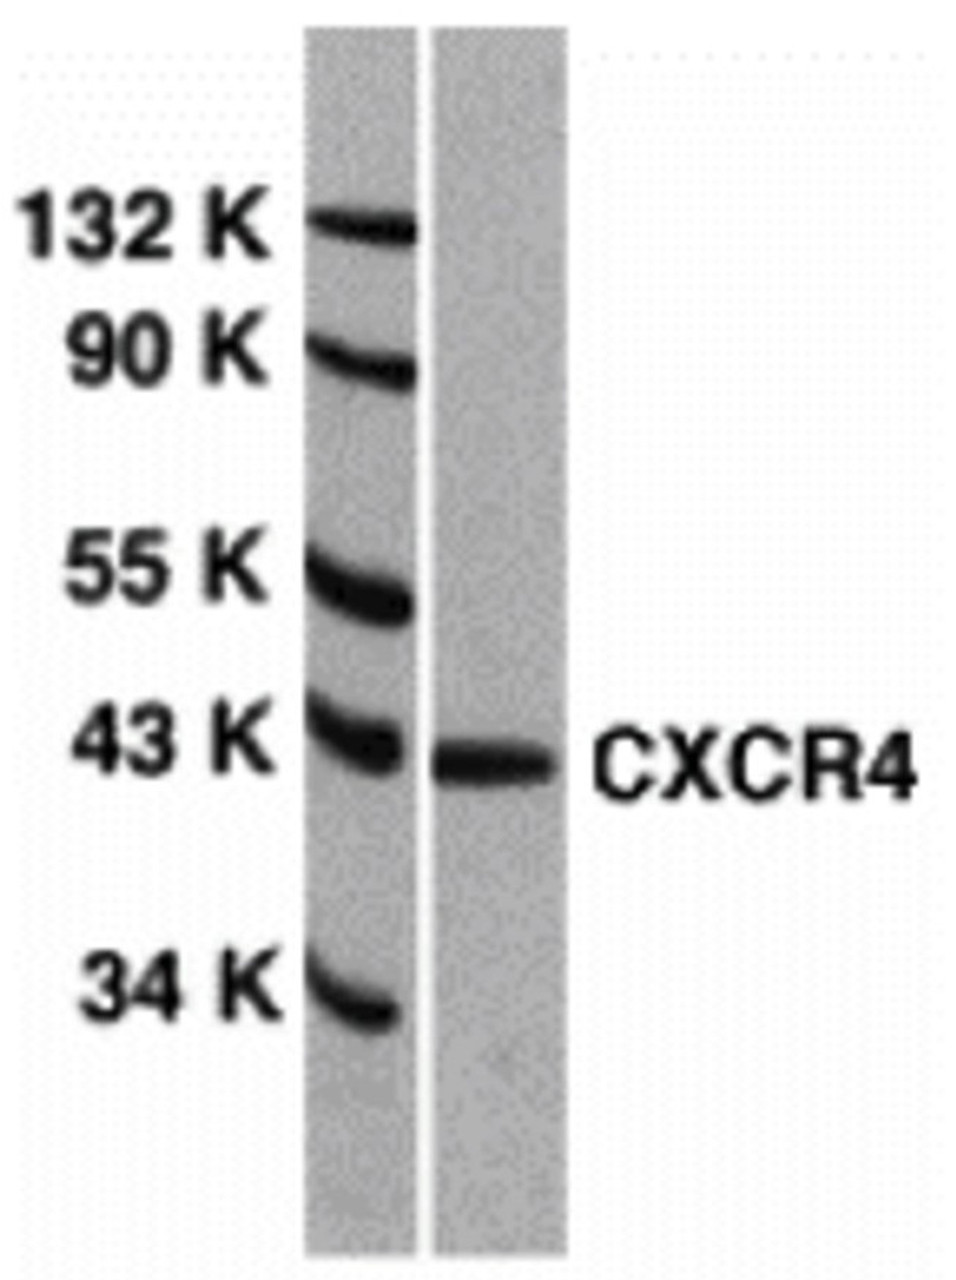 <strong>Figure 1 Western Blot Validation of CXCR4 in HeLa Cells </strong><br> Loading: 15 &#956;g of lysates per lane.
Antibodies: 1012 (1 &#956;g/mL), 1 h incubation at RT in 5% NFDM/TBST. Secondary: Goat anti-rabbit IgG HRP conjugate at 1:10000 dilution.